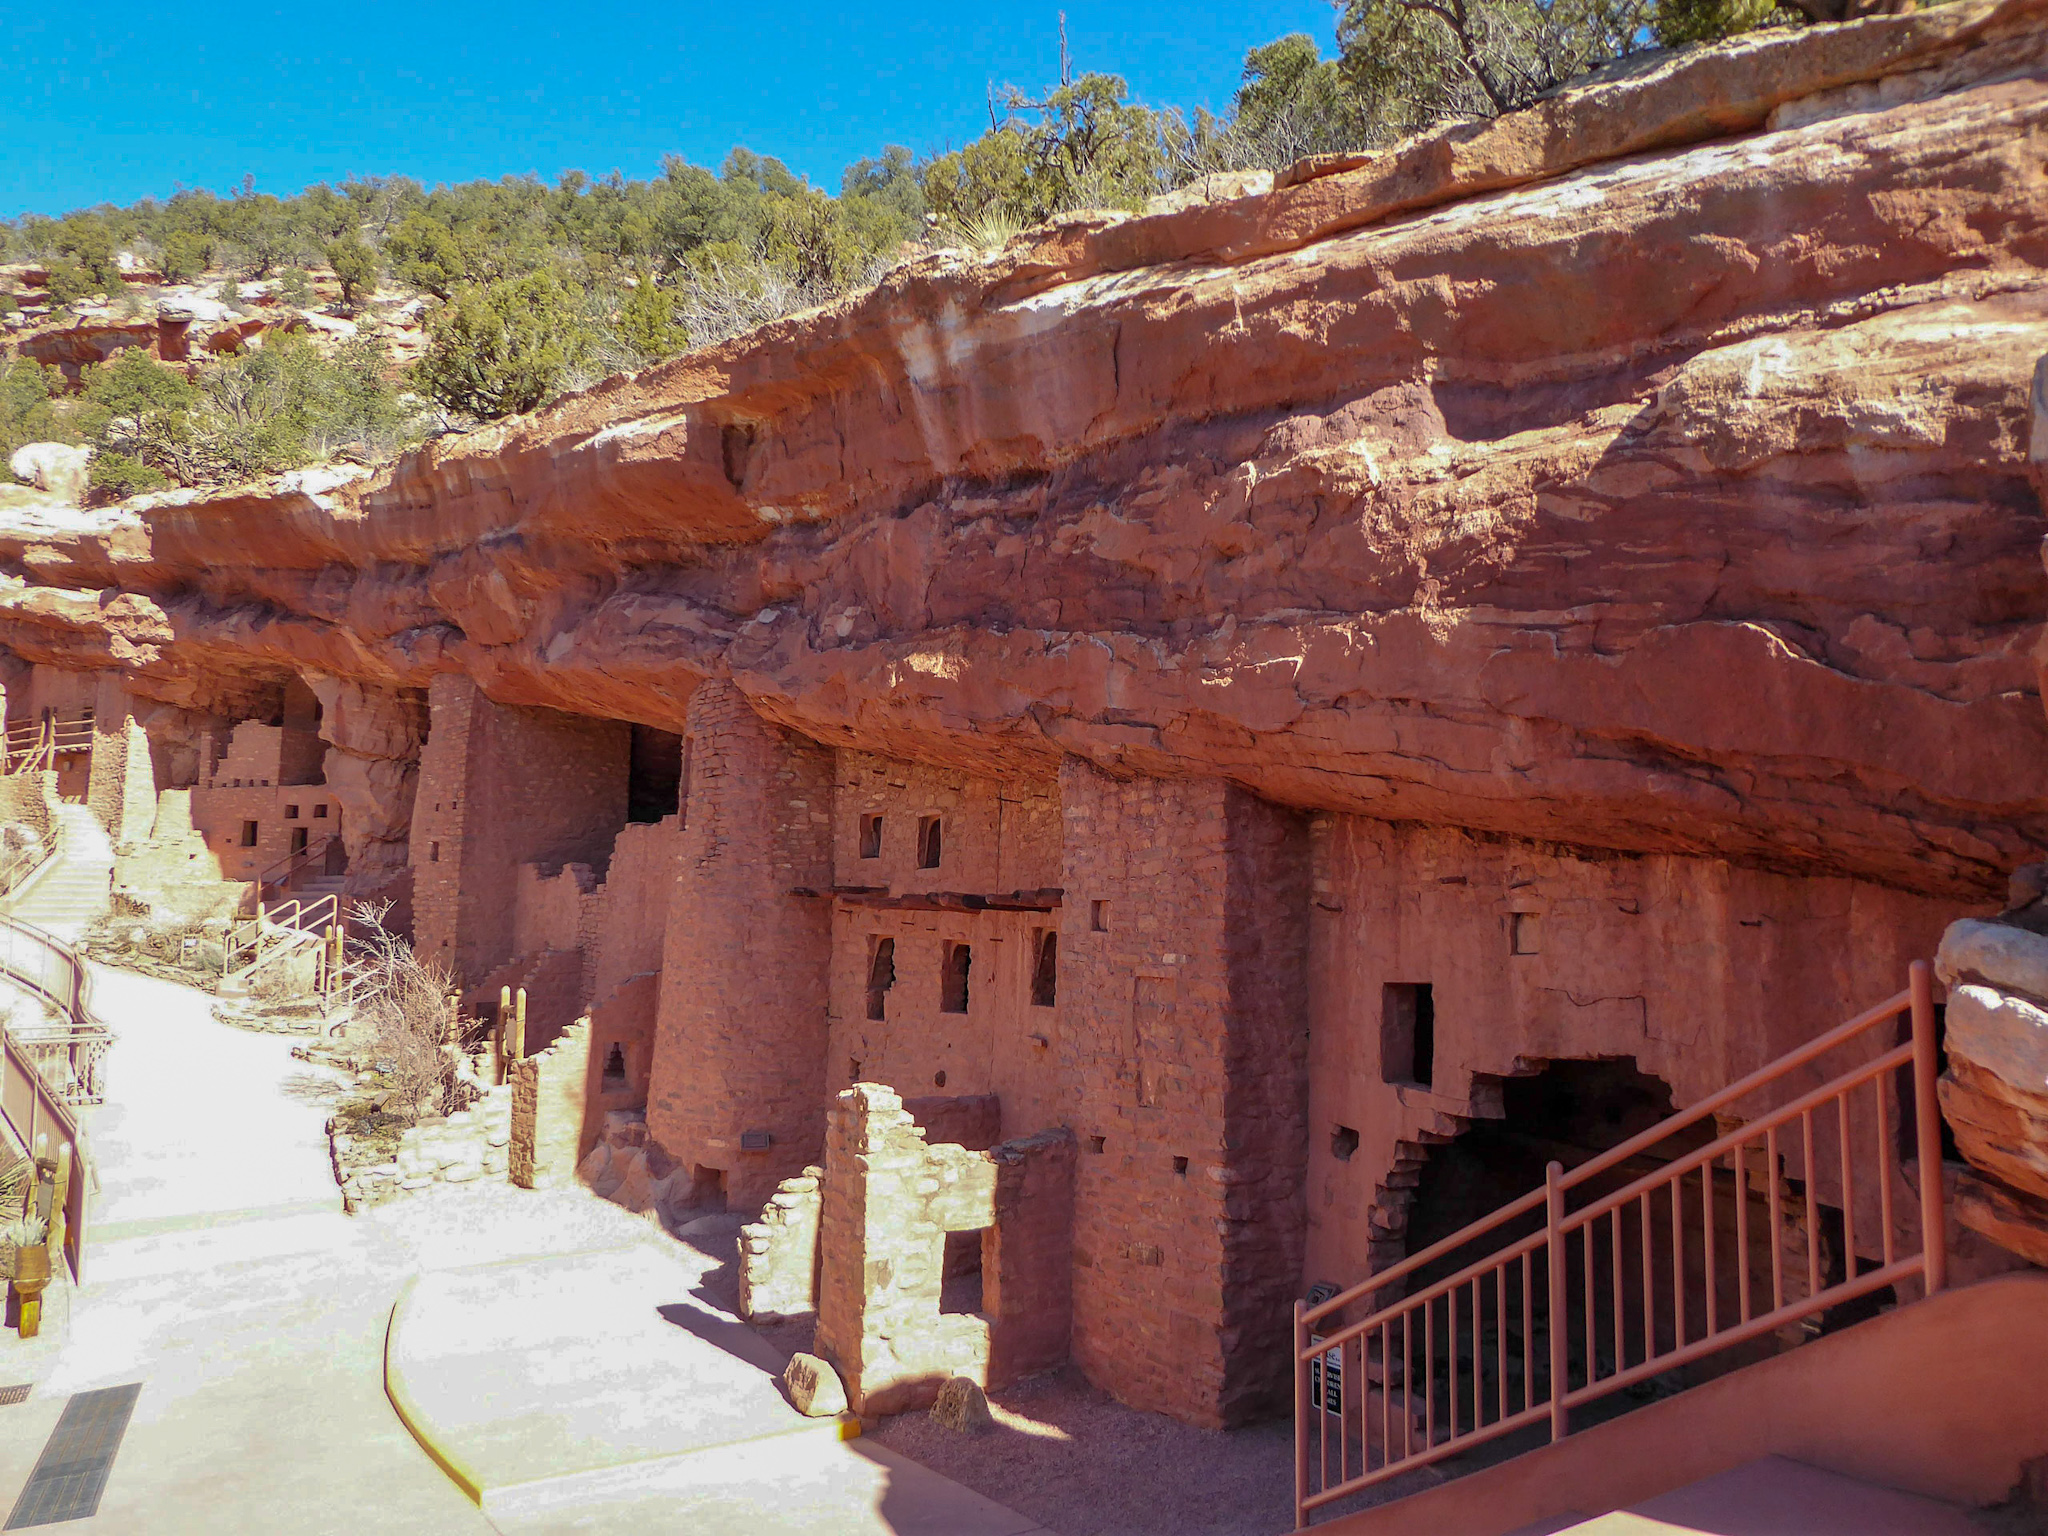 Listen to the Voices of the Past at Manitou Cliff Dwellings